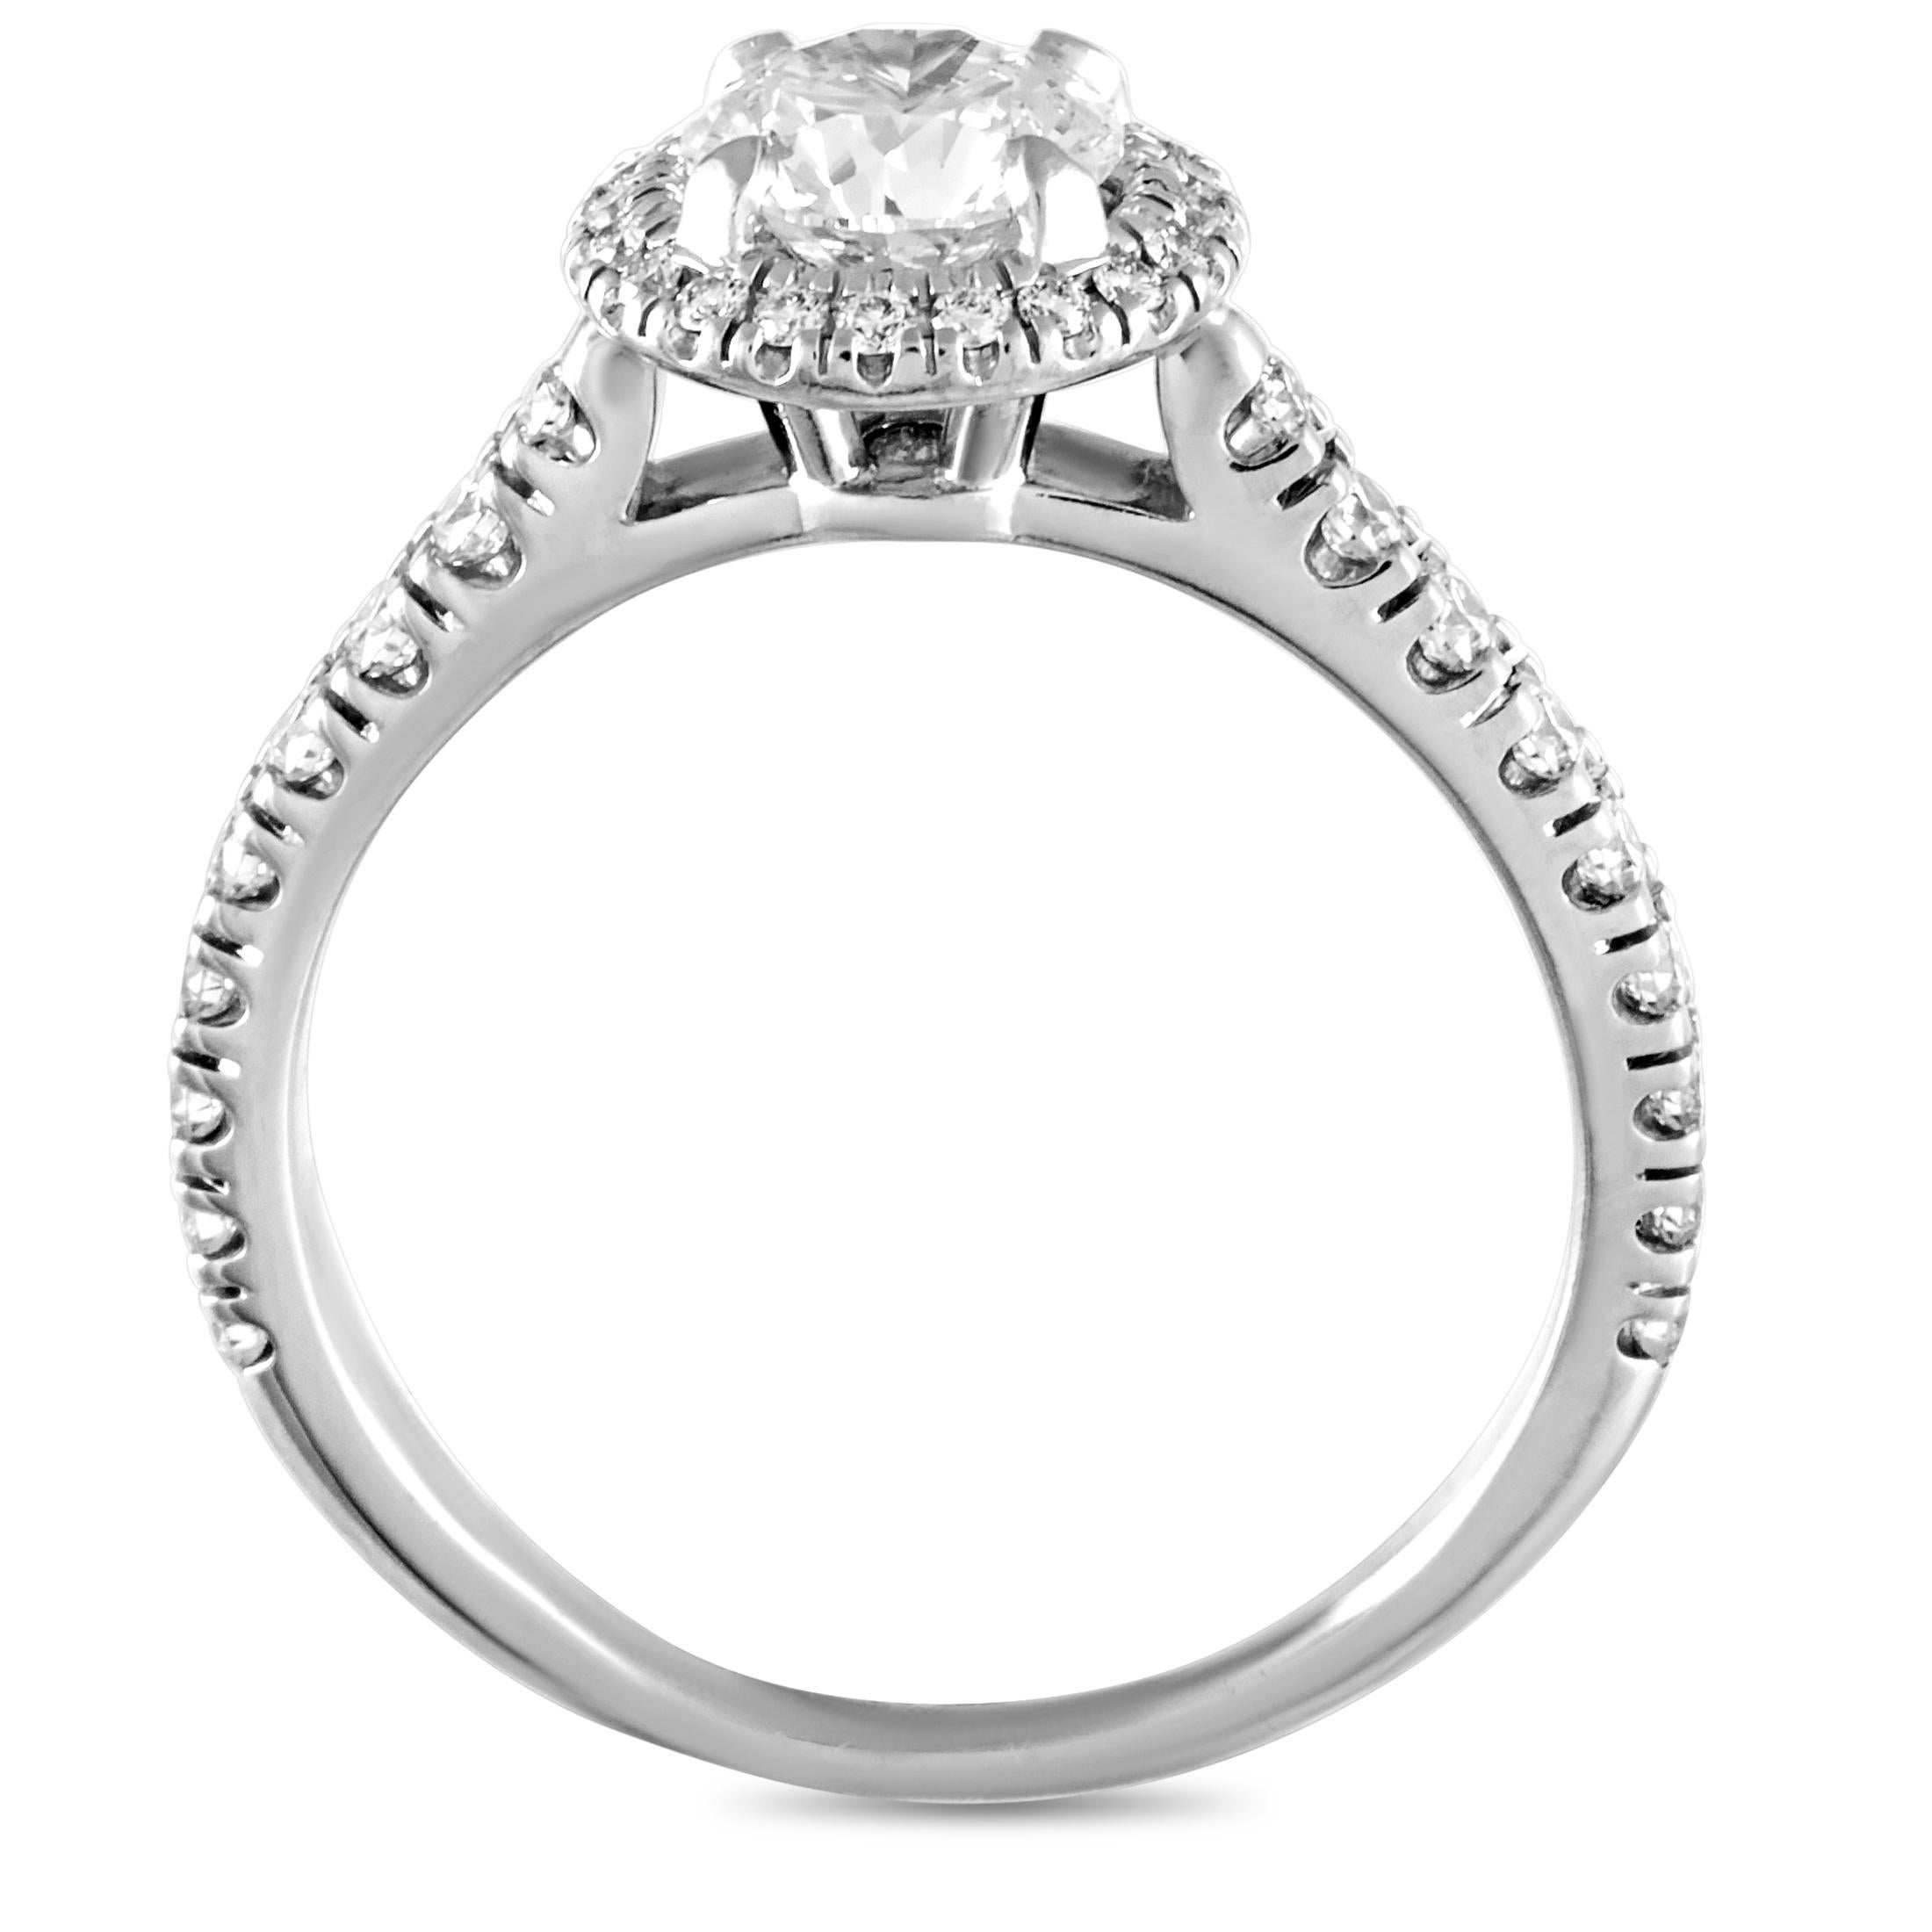 This Cartier engagement ring is crafted from platinum and weighs 4.3 grams. It boasts band thickness of 2 mm and top height of 6 mm, while top dimensions measure 20 by 9 mm. The ring is set with a total of 1.18 carats of diamonds, with the center